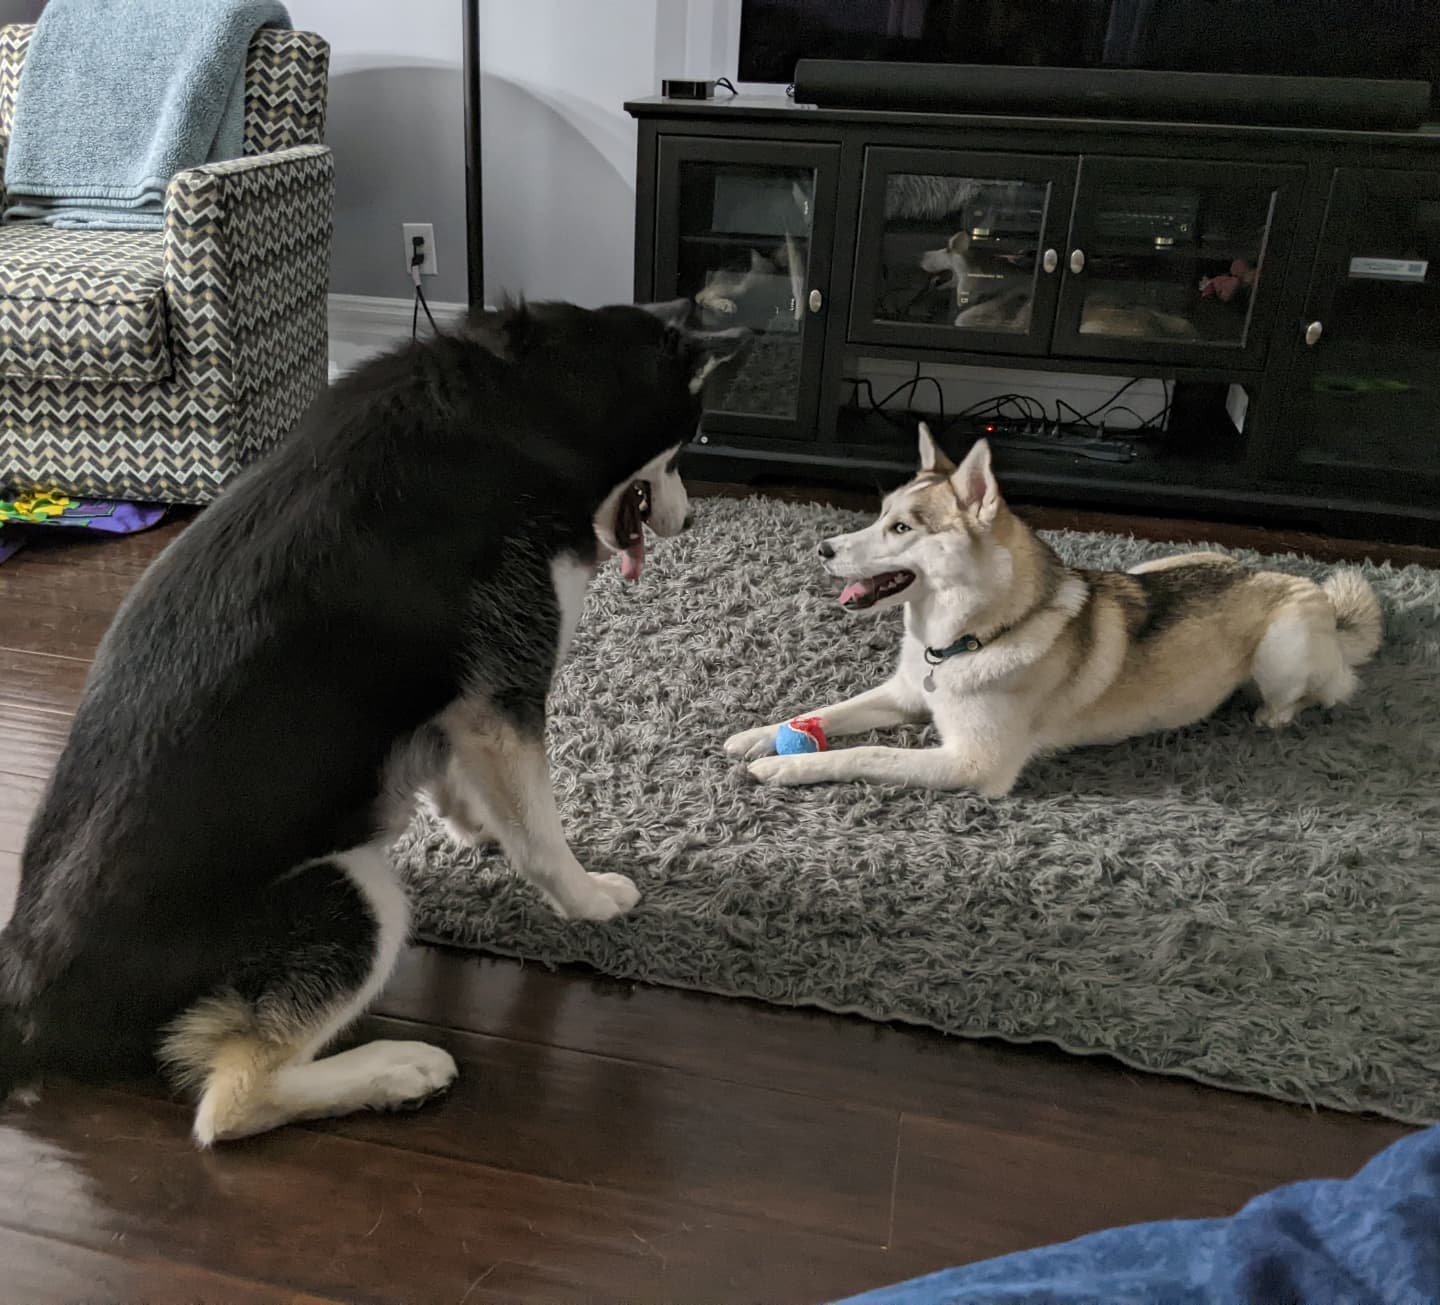 There's a standoff here over a squeaky ball... #stlnanuq #stlhuskymishka #huskiesofinstagram